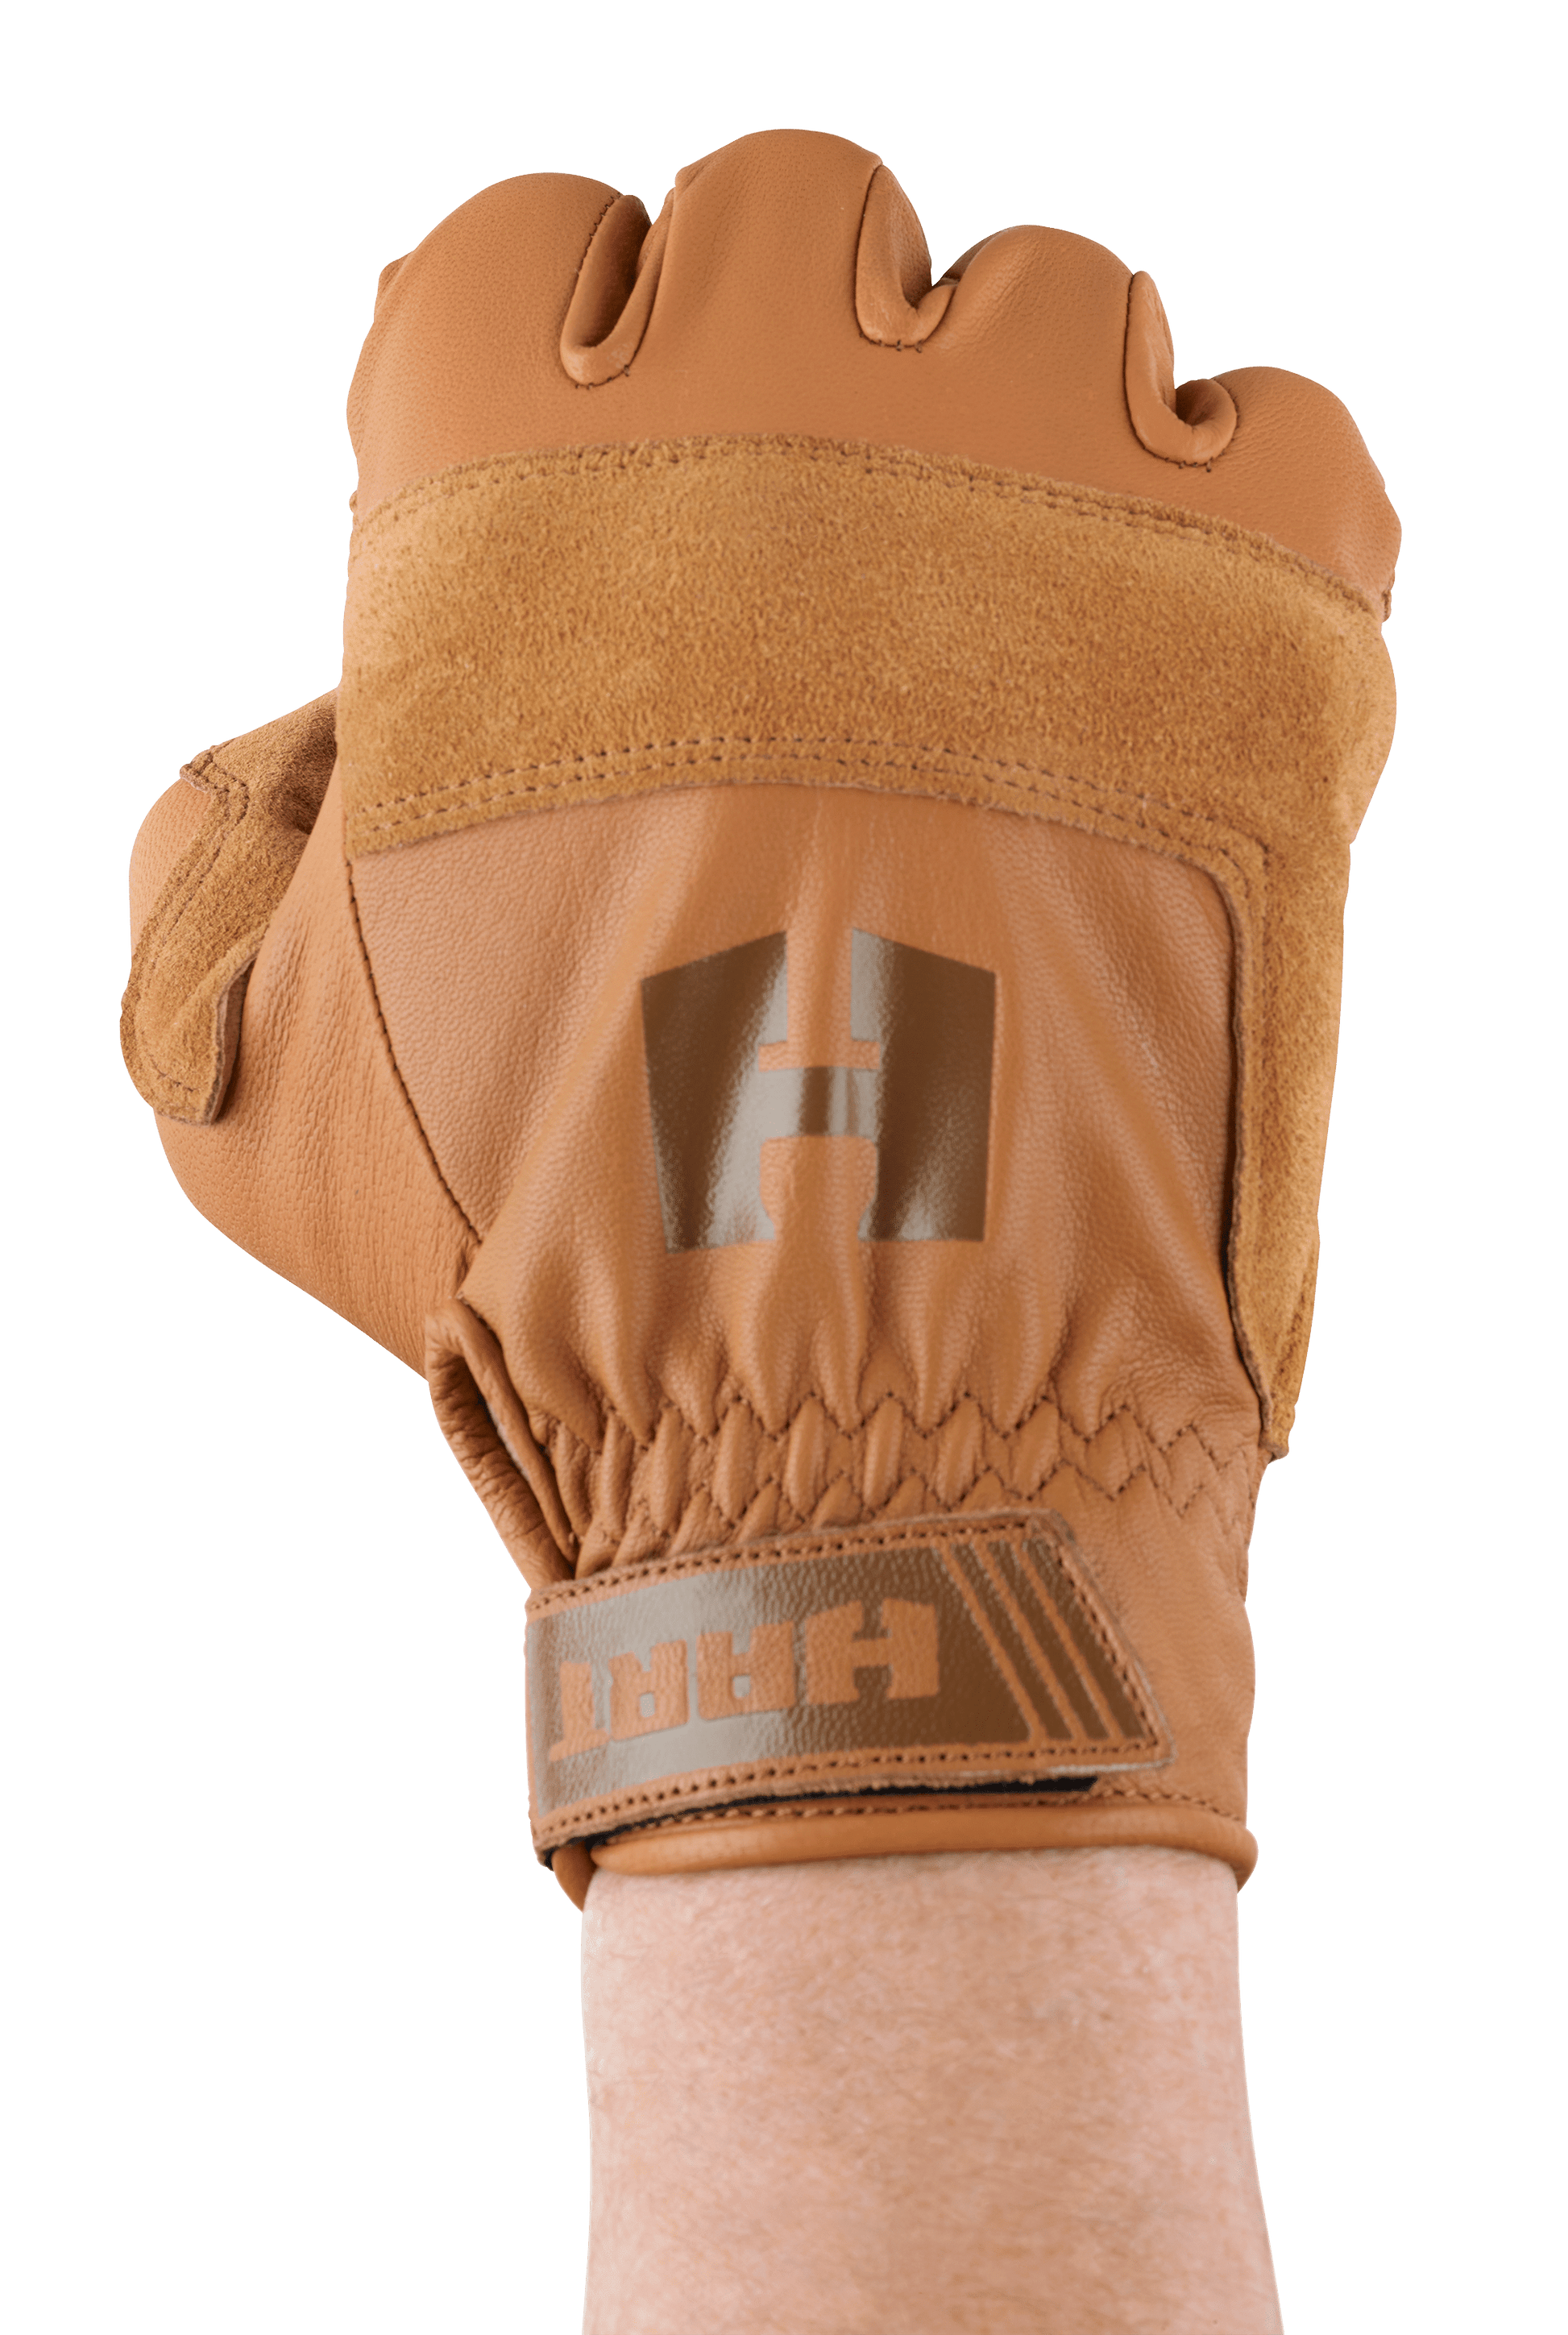 Leather Gloves - X-Large